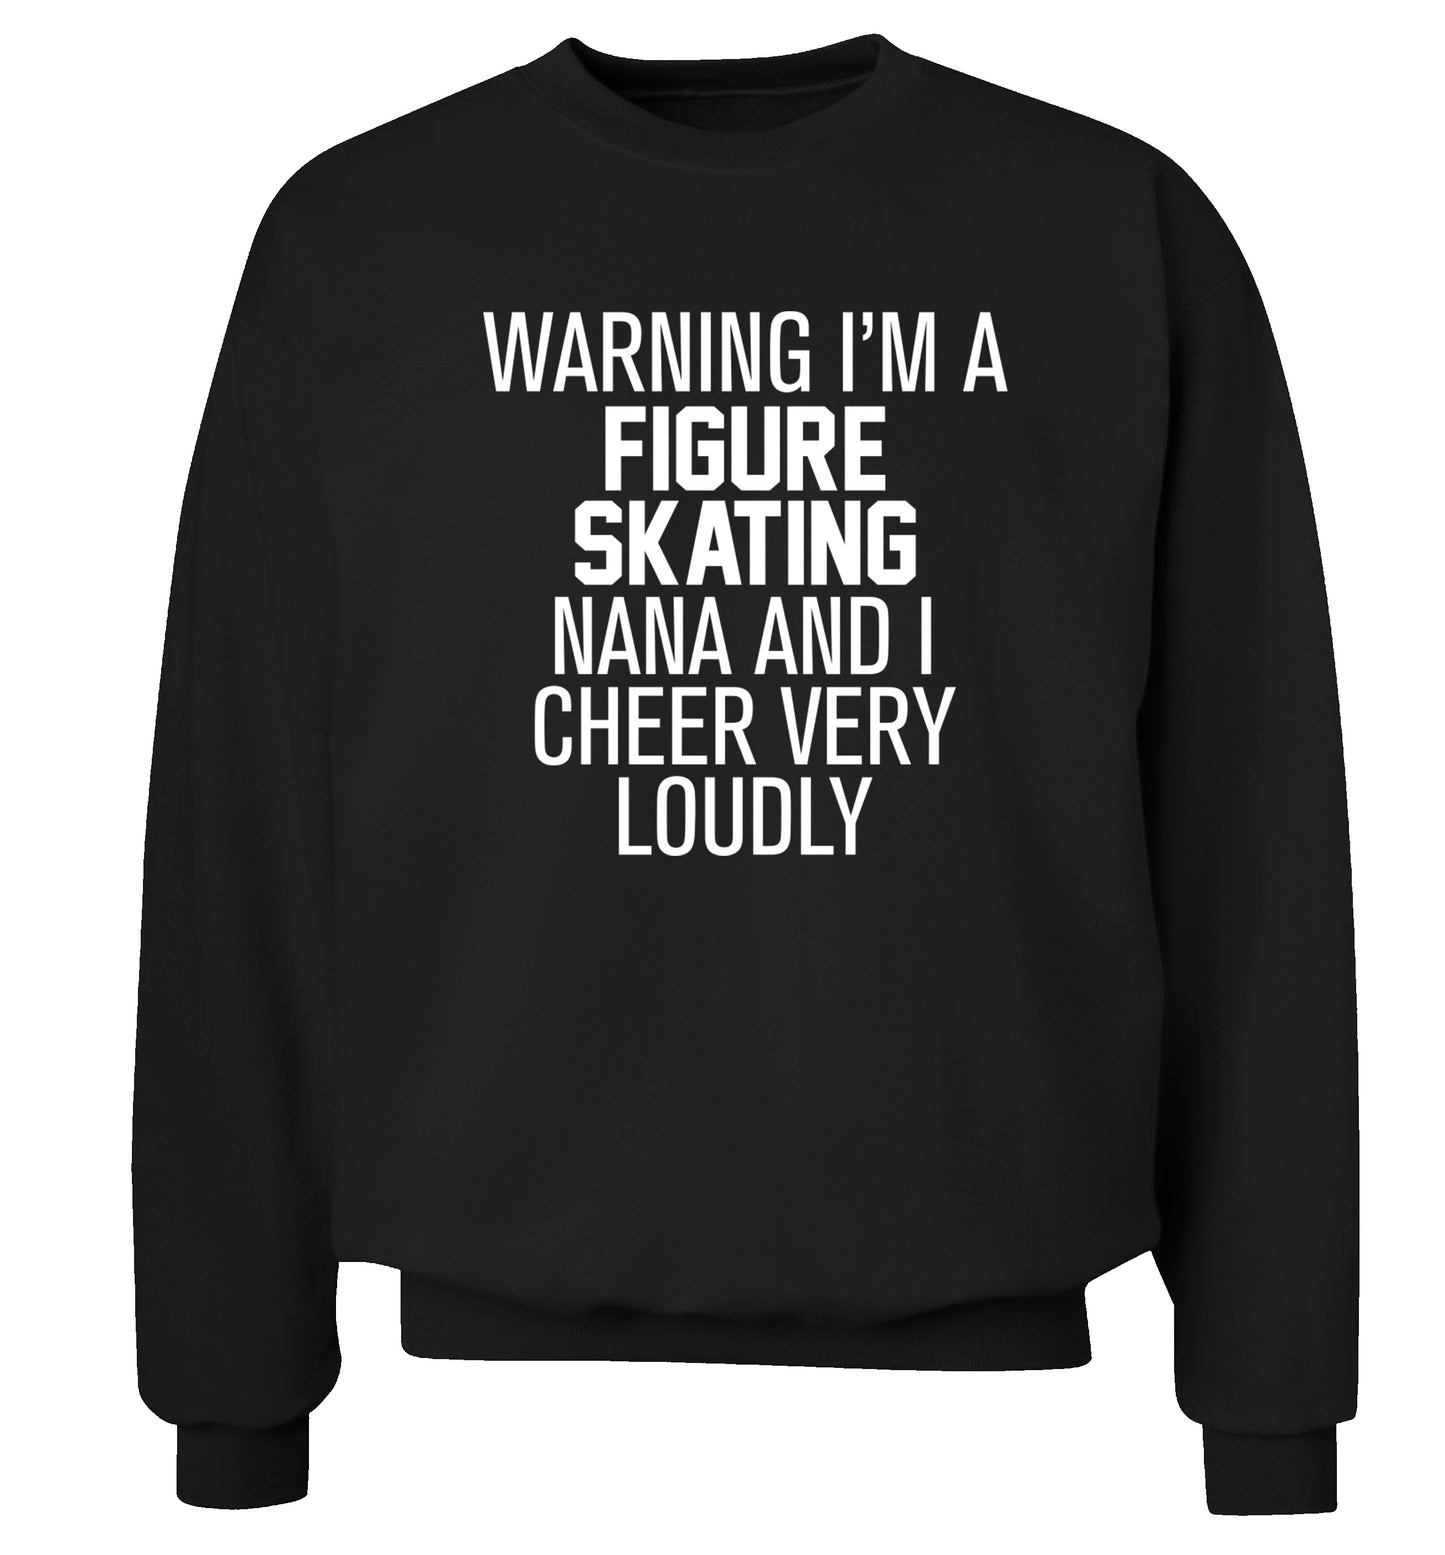 Warning I'm a figure skating nana and I cheer very loudly Adult's unisexblack Sweater 2XL